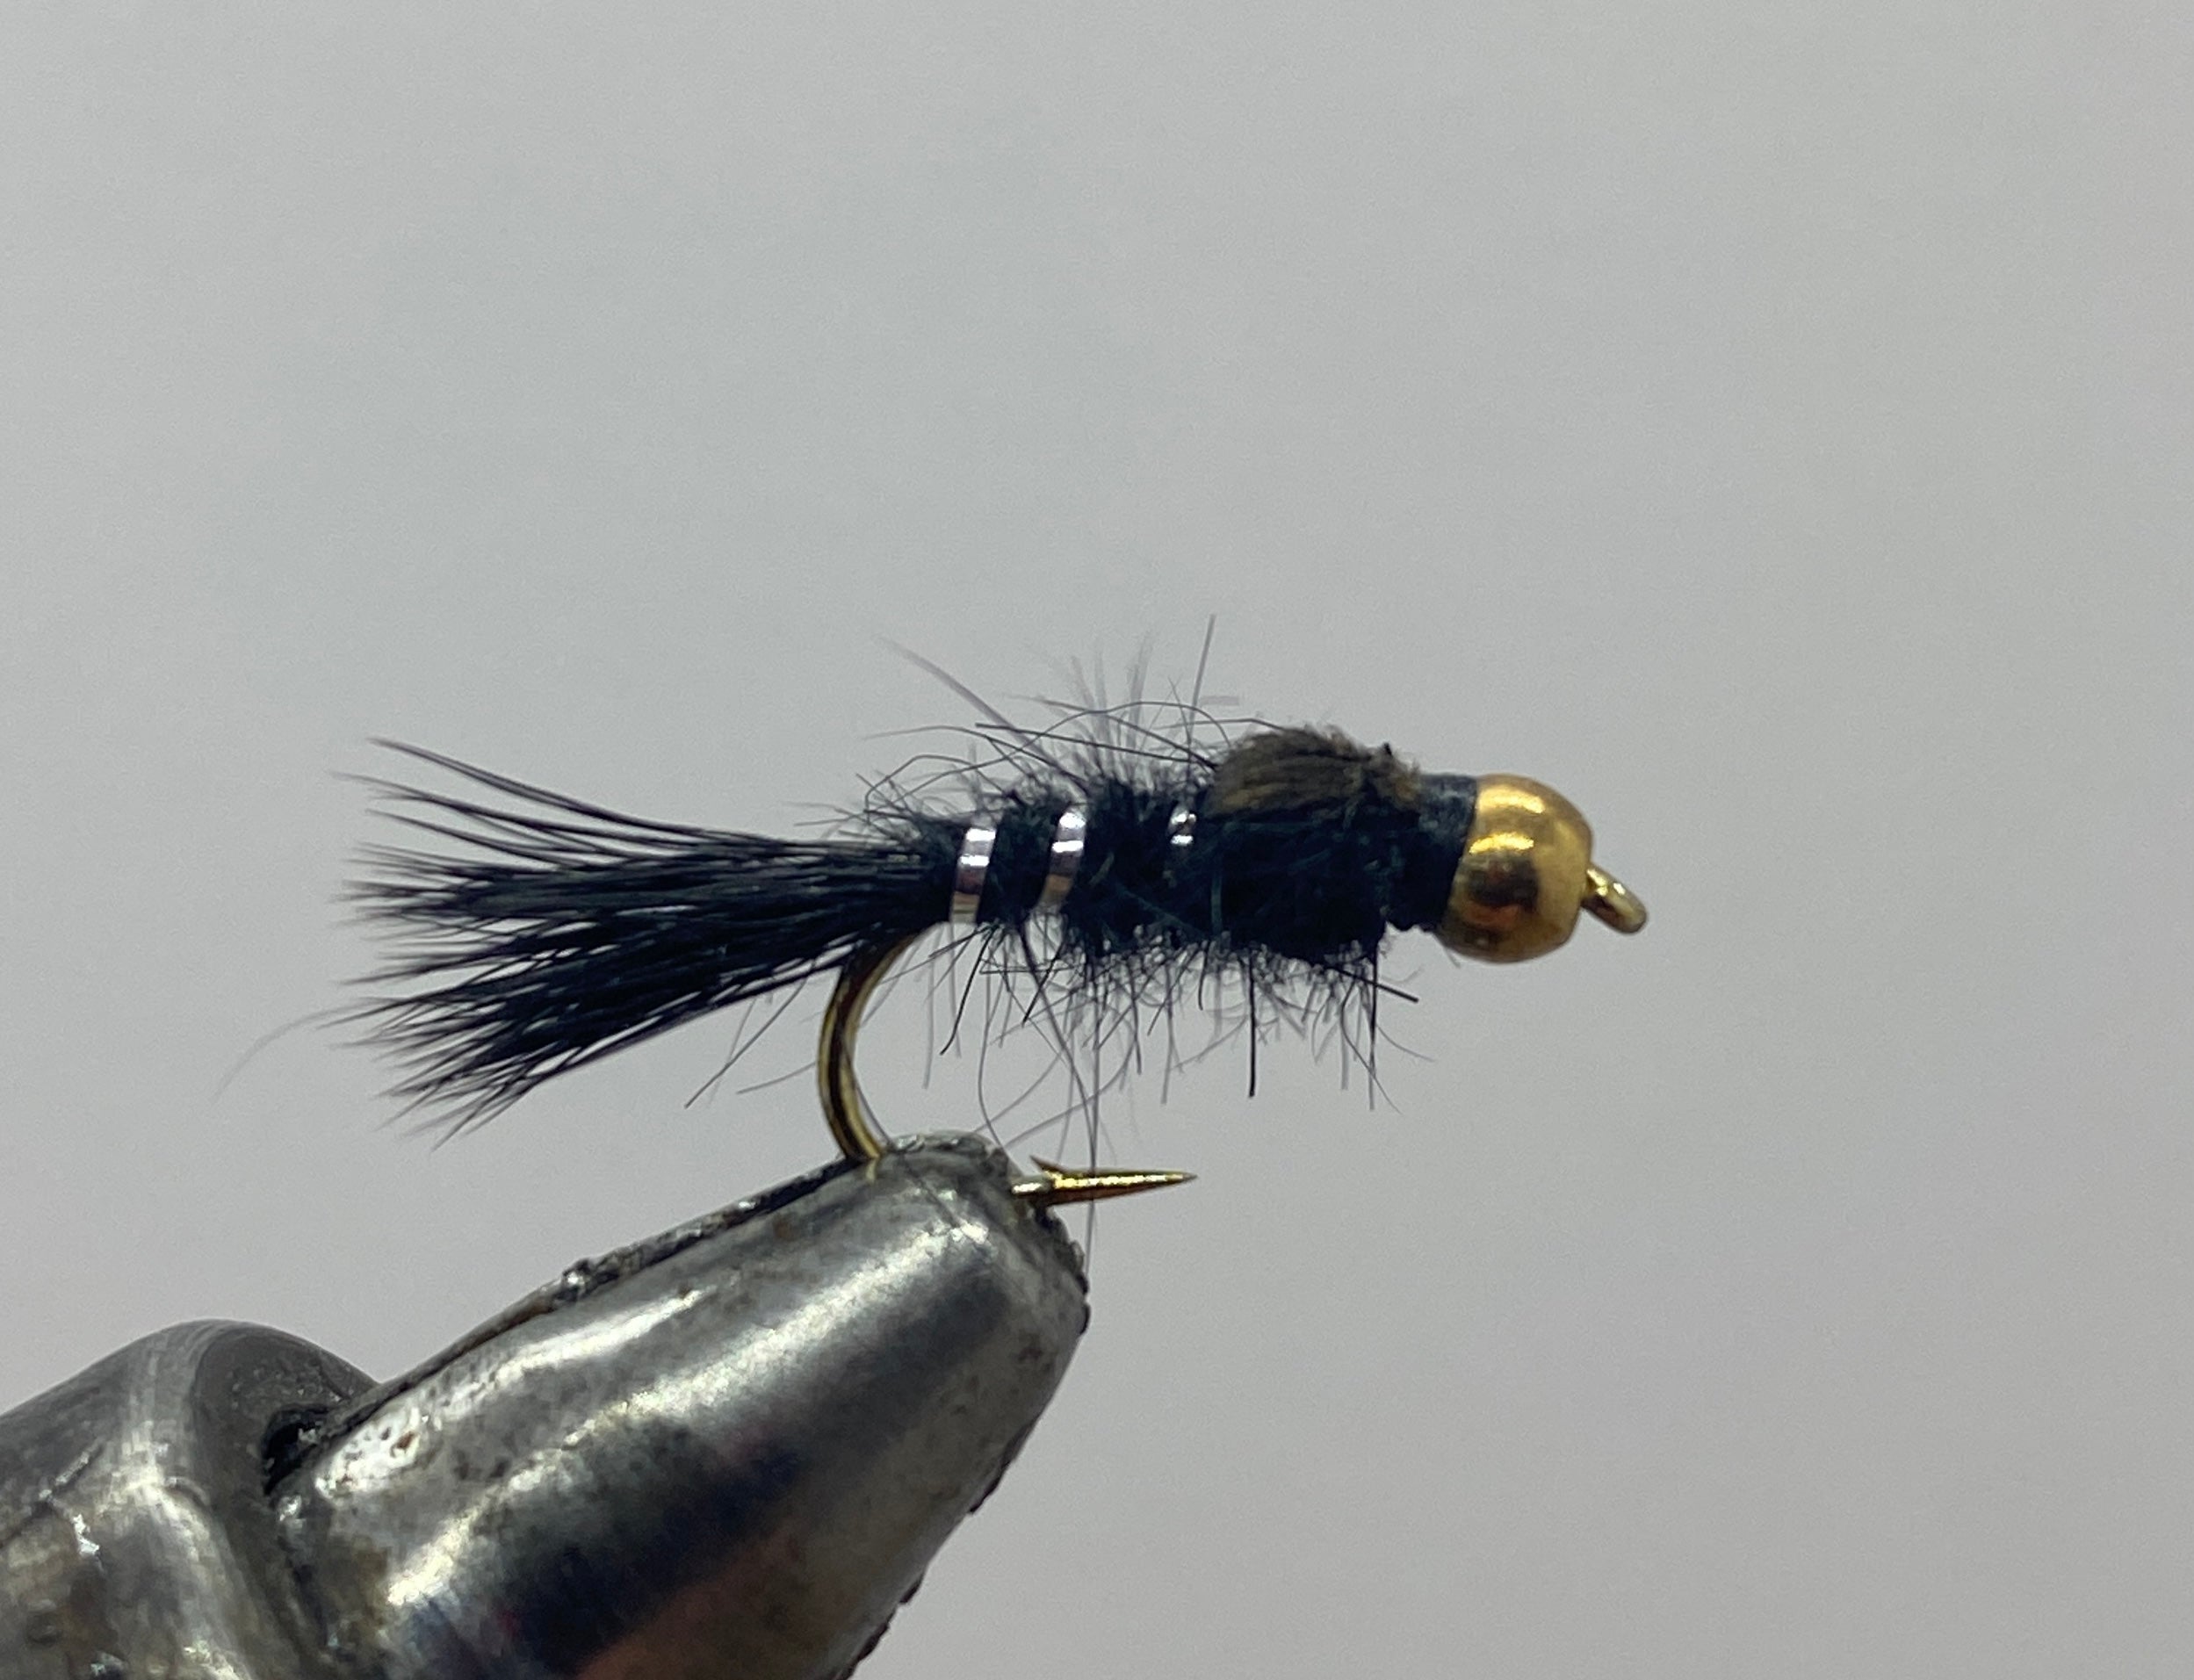 Bead Head Nymph Fly Fishing Flies - Flashback Gold Ribbed Hare's